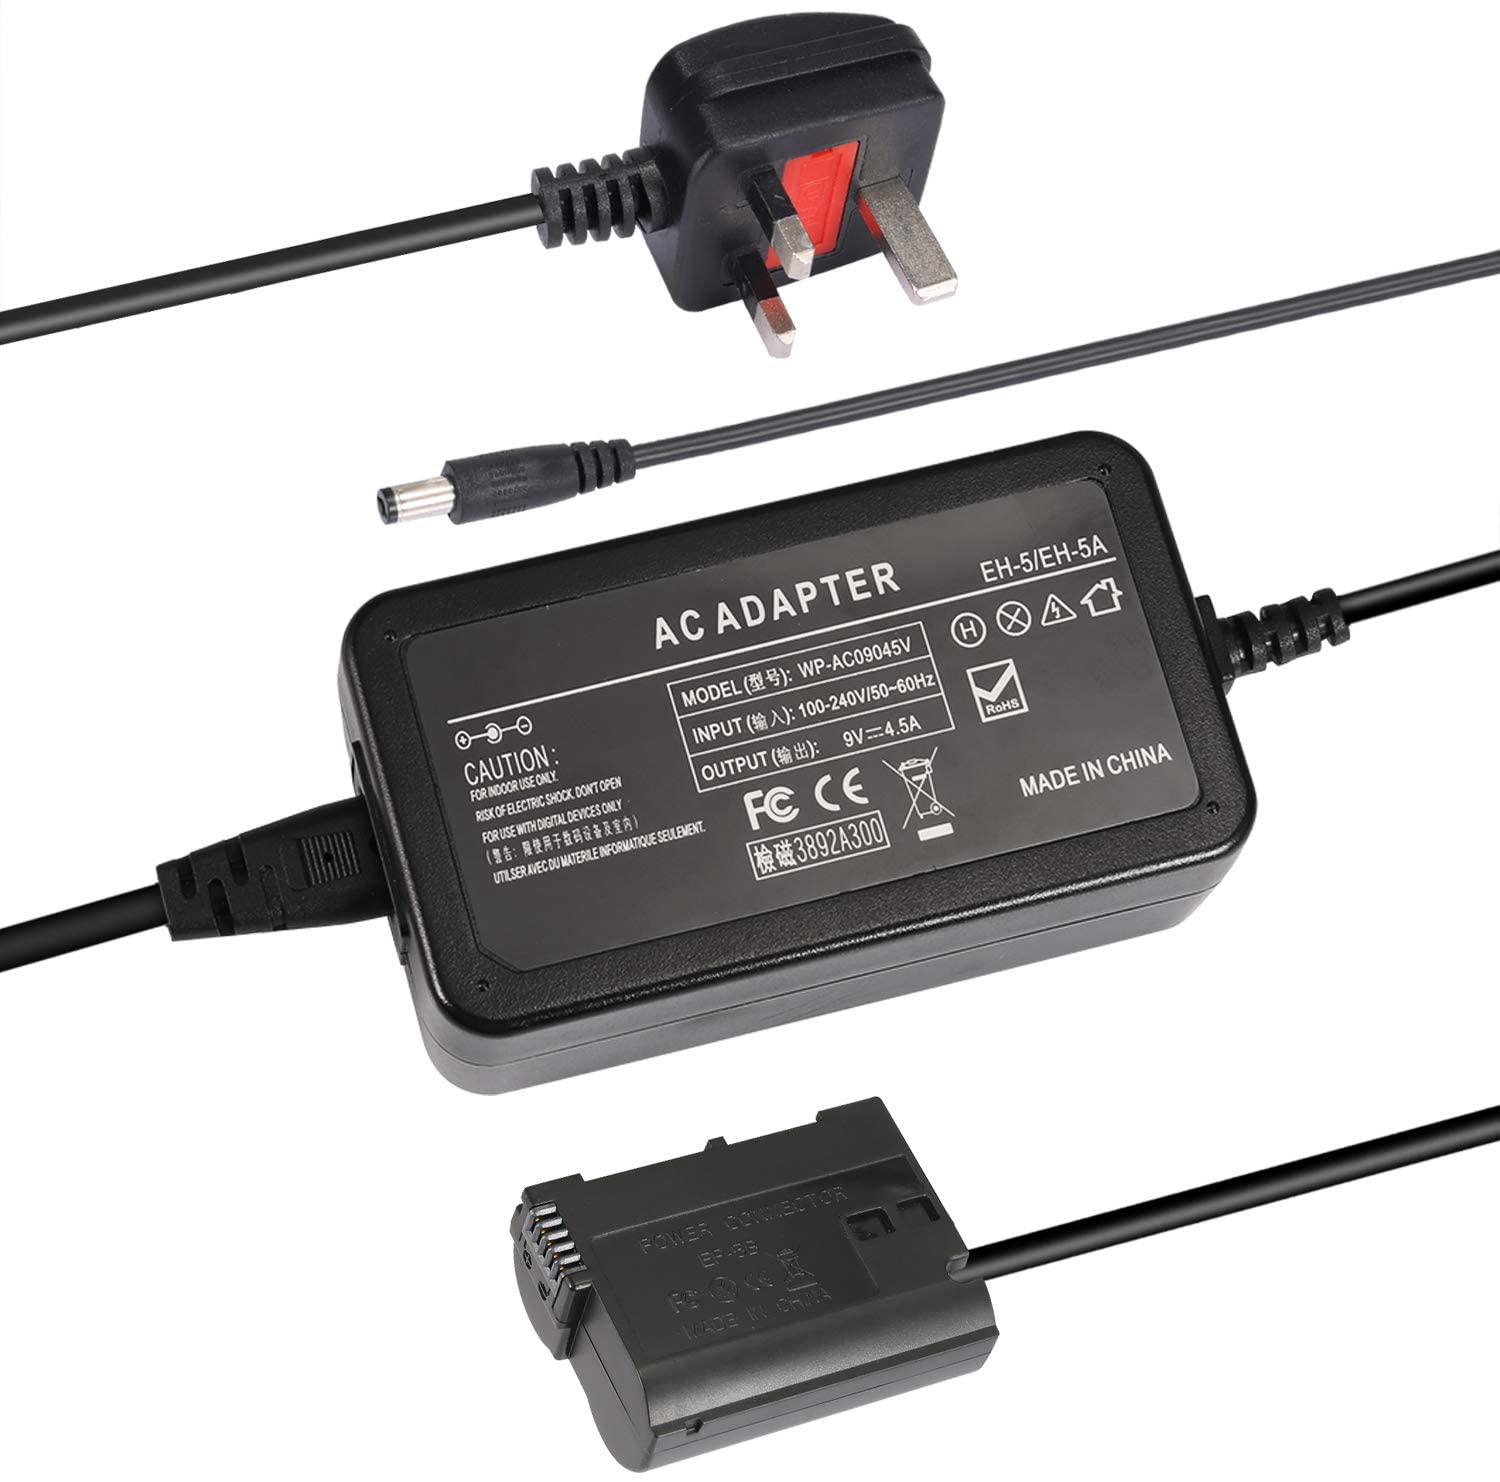 EP-5B AC Power Supply with EH-5 AC Adapter kit for NIKON